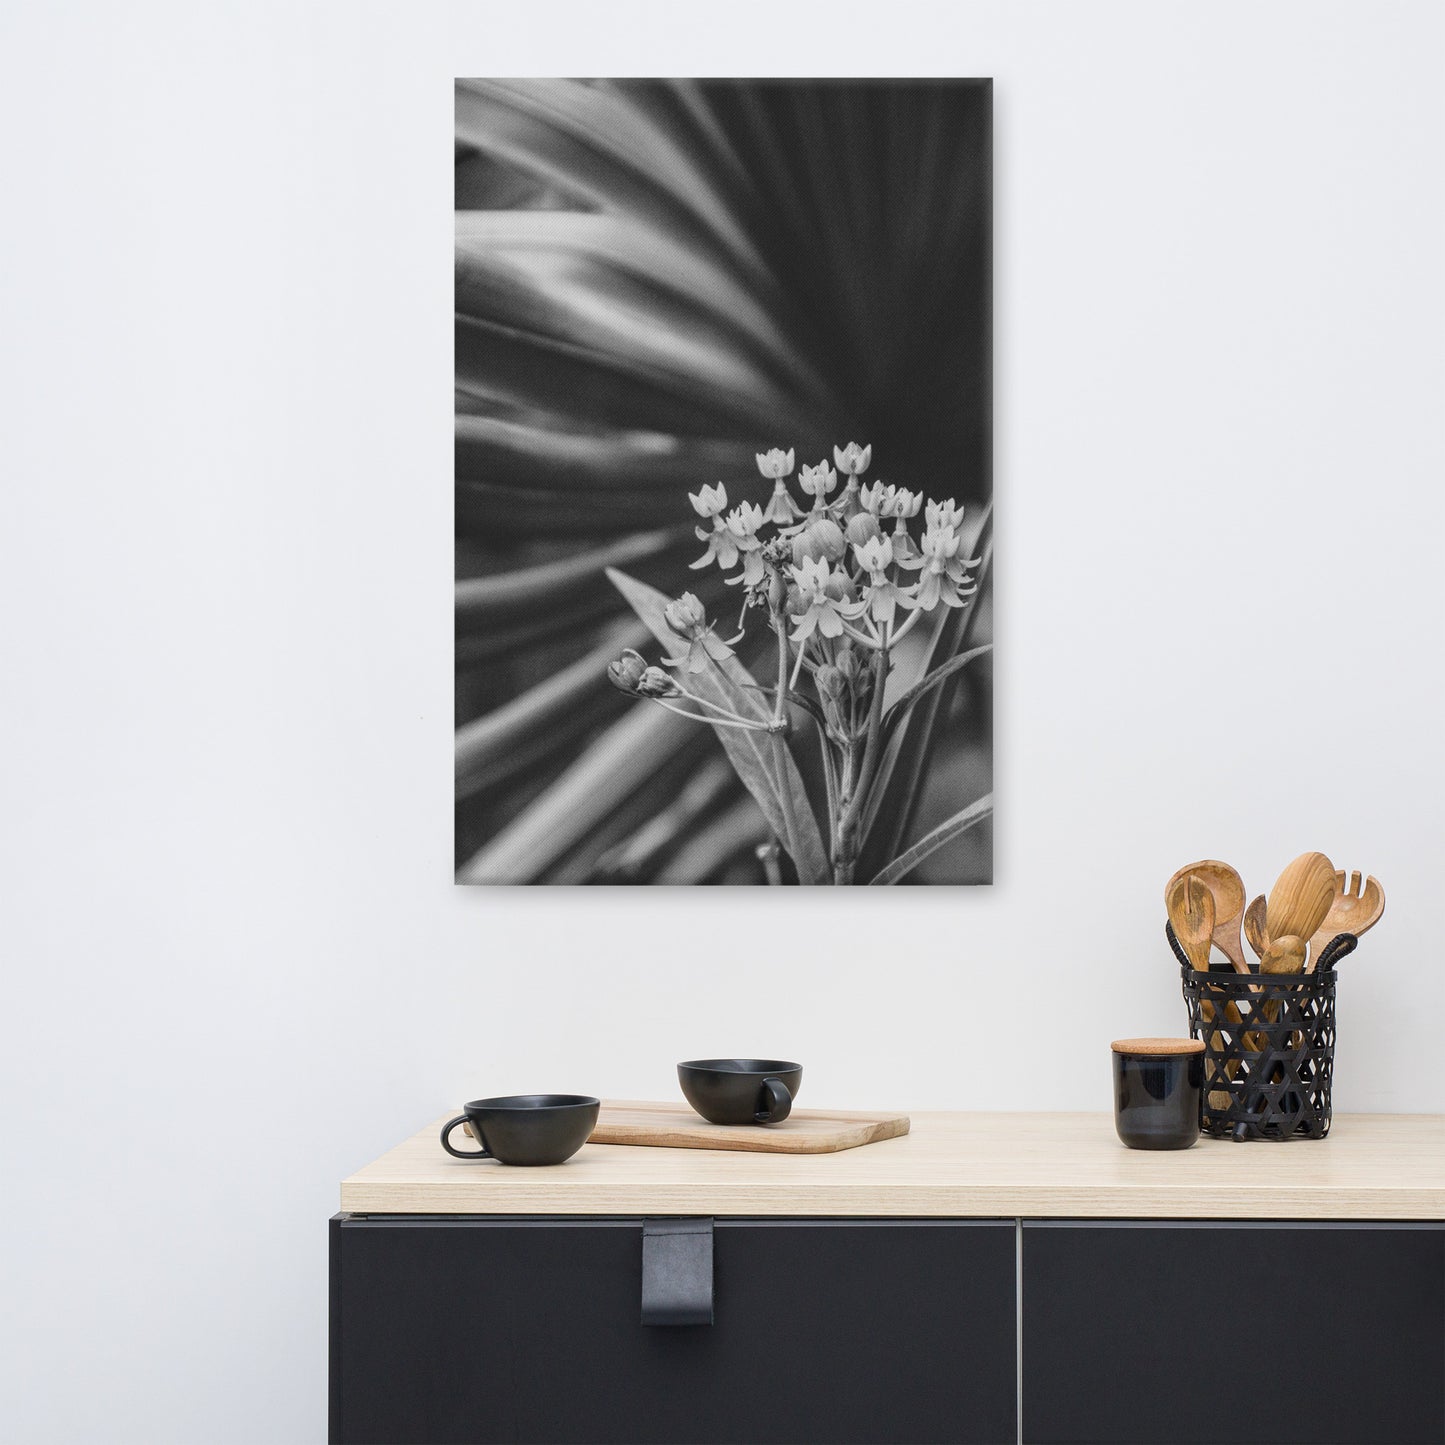 Bloodflowers and Palm Black and White Floral Nature Canvas Wall Art Prints